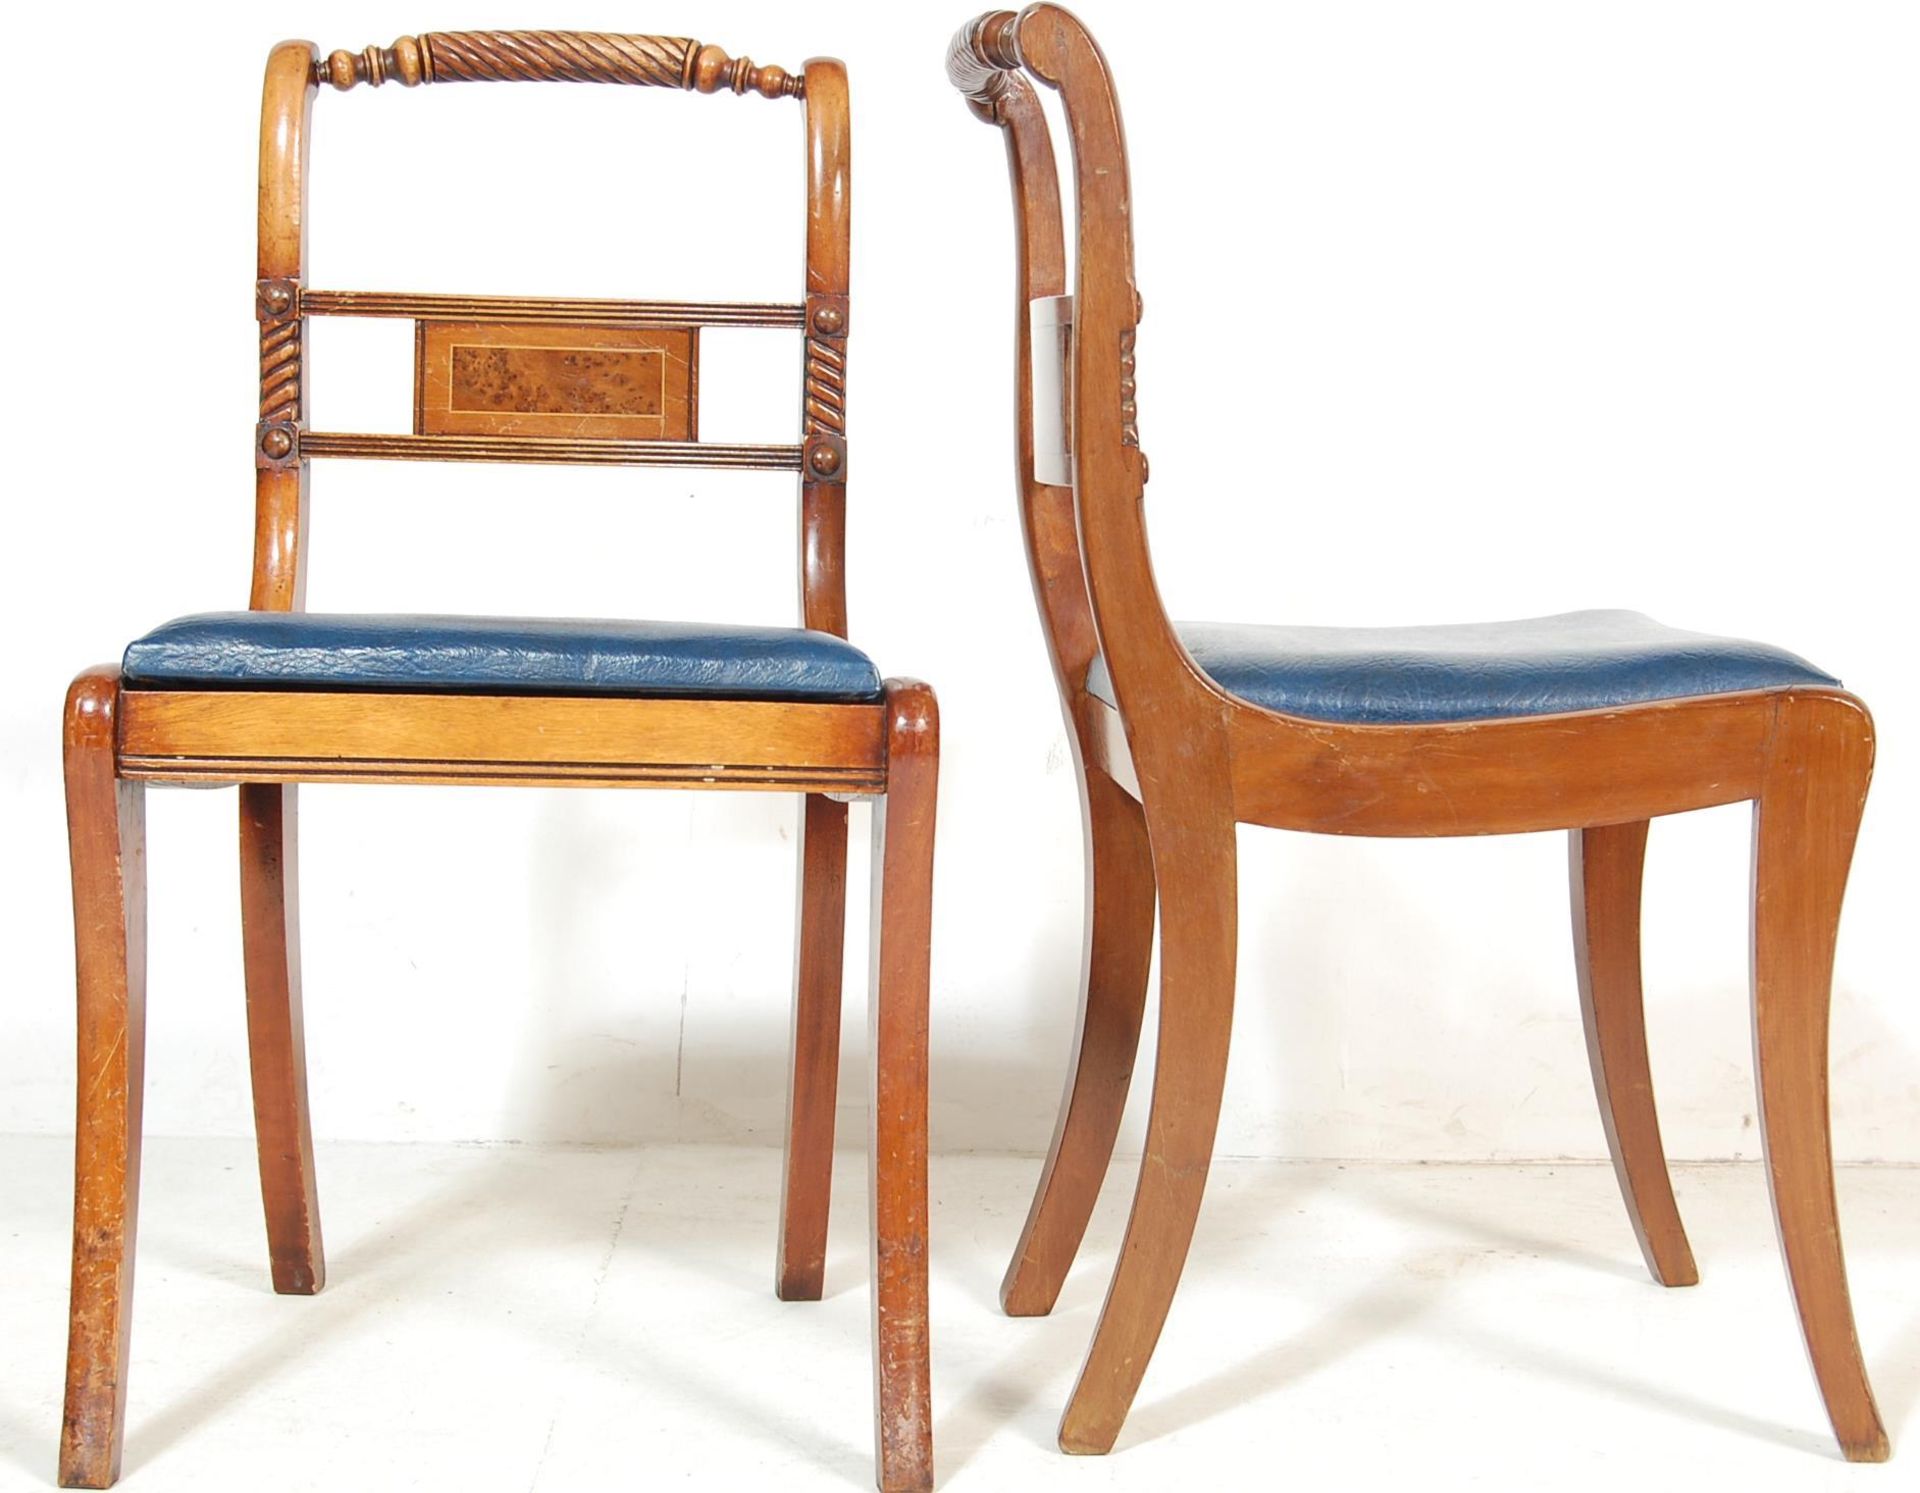 TEN EARLY 20TH CENTURY EDWARDIAN MAHOGANY DINING CHAIRS - Image 3 of 5